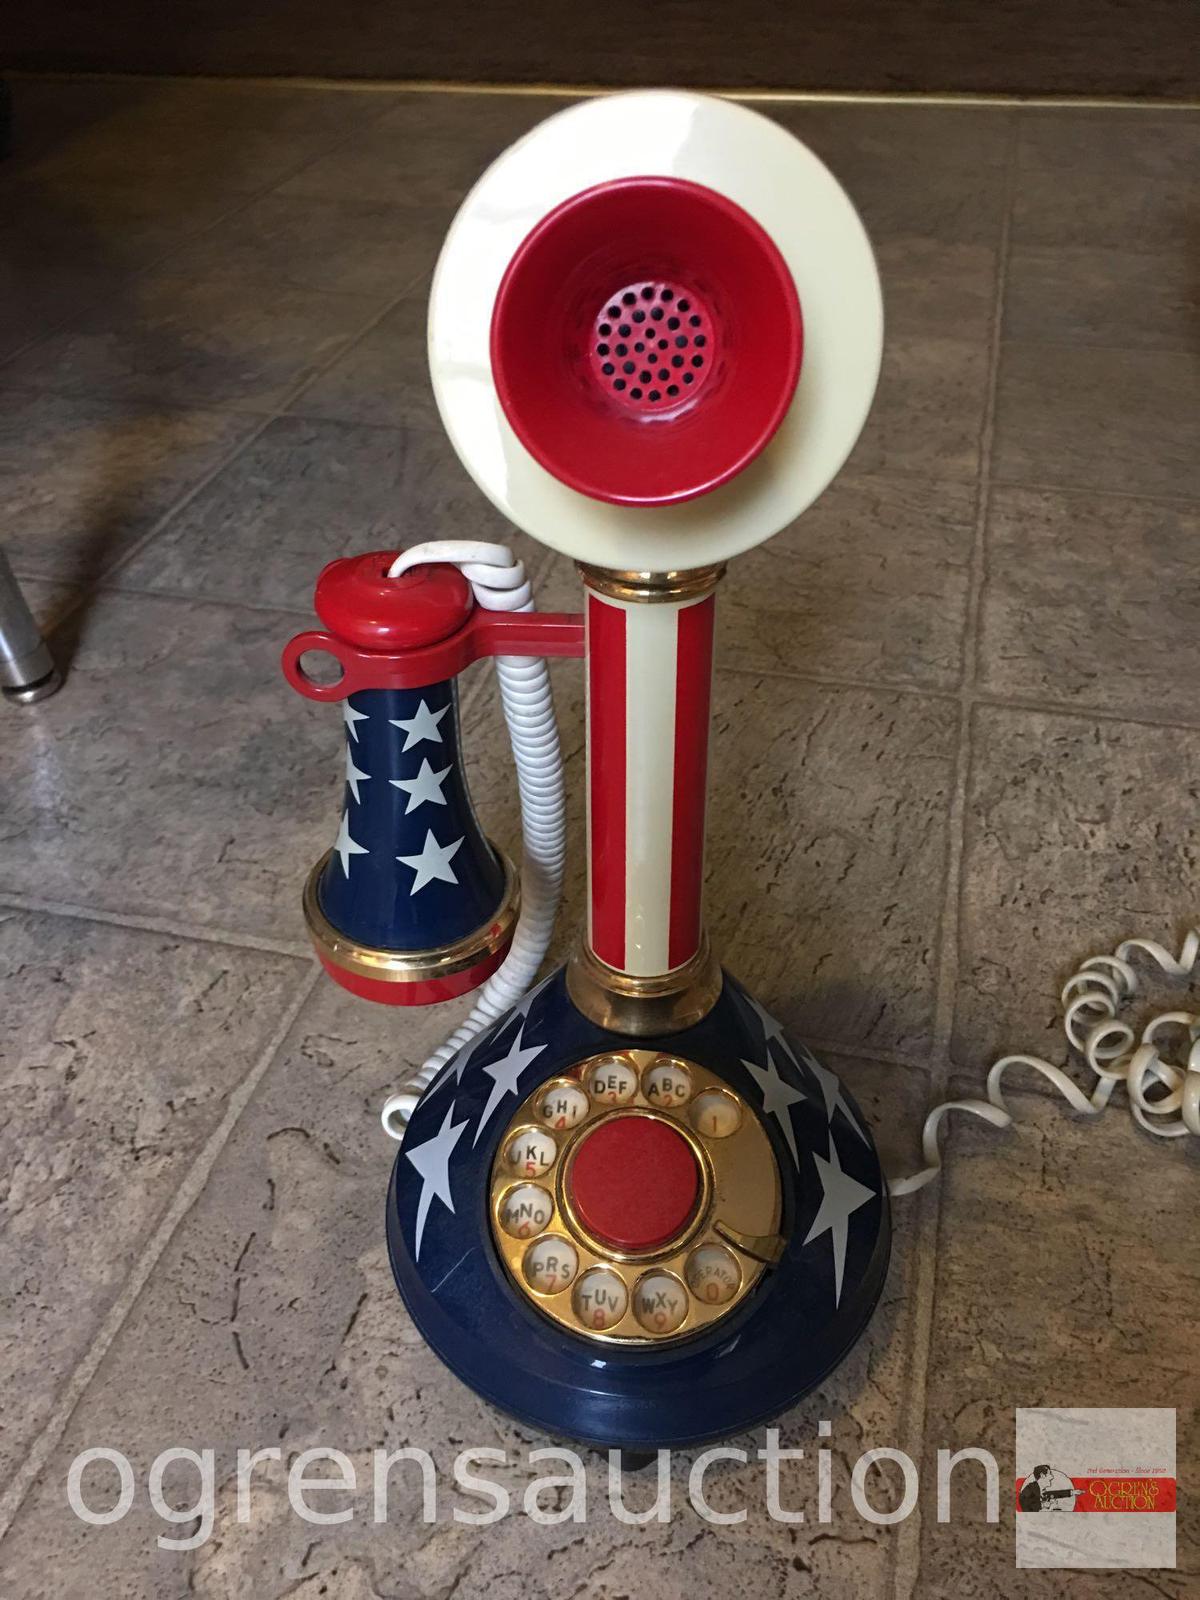 Telephone - Candlestick telephone - contemporary Red/white/blue motif, 13"h